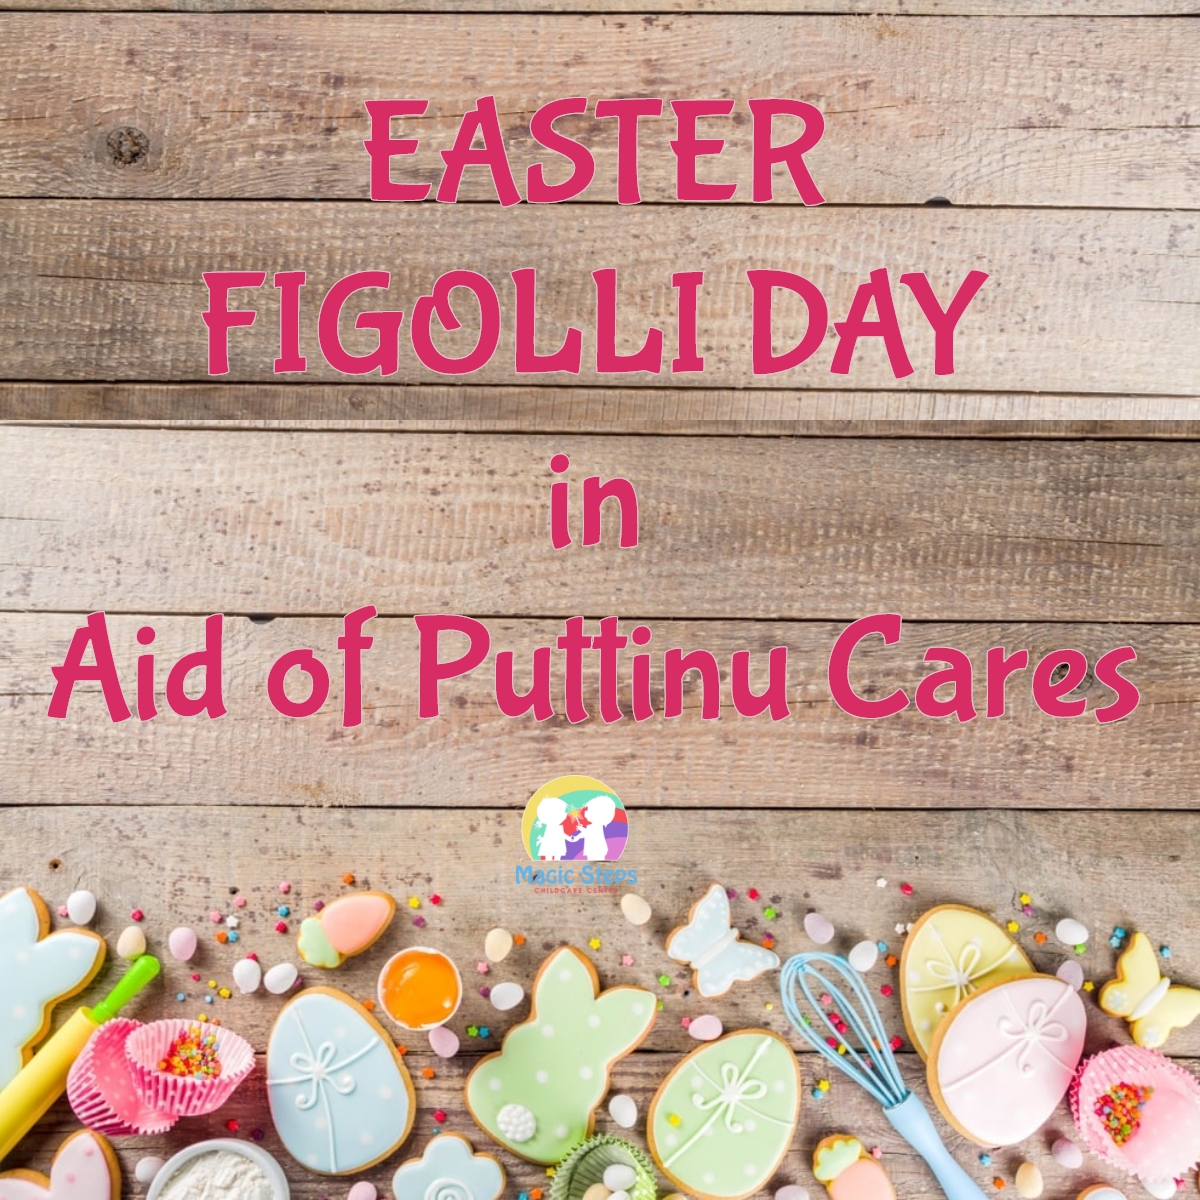 Easter Figolla Day in Aid of Puttinu Cares- Tuesday 4th April